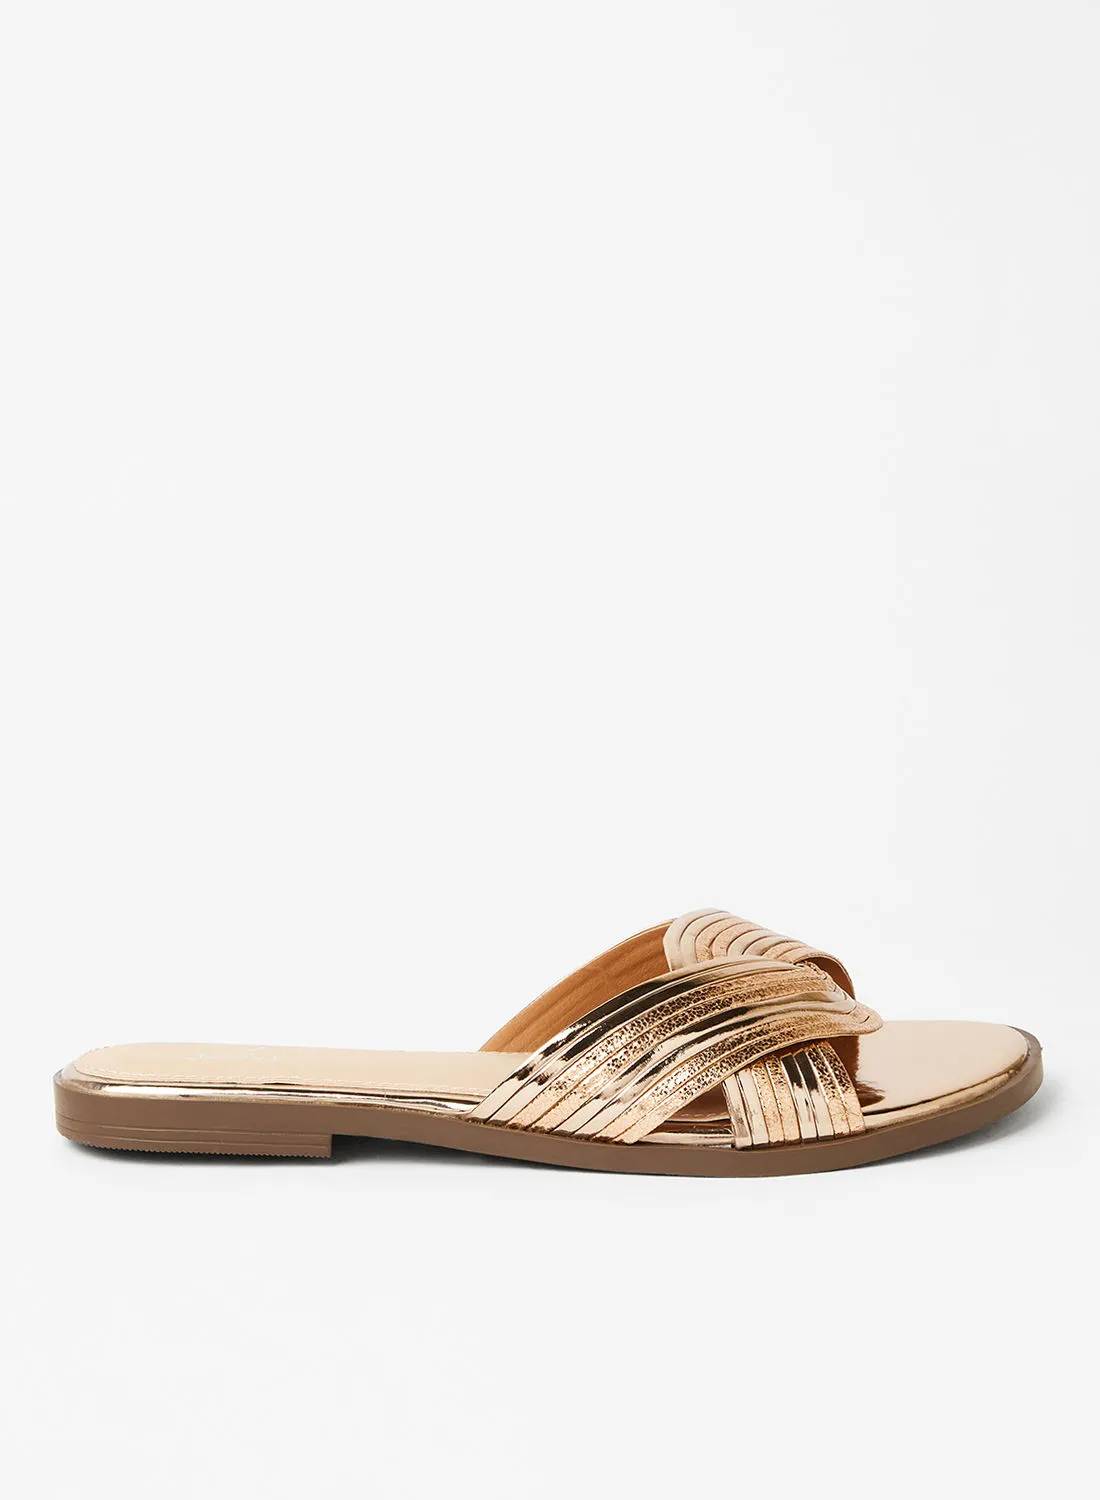 Jove Casual Slip-On Flat Sandals Gold/Silver